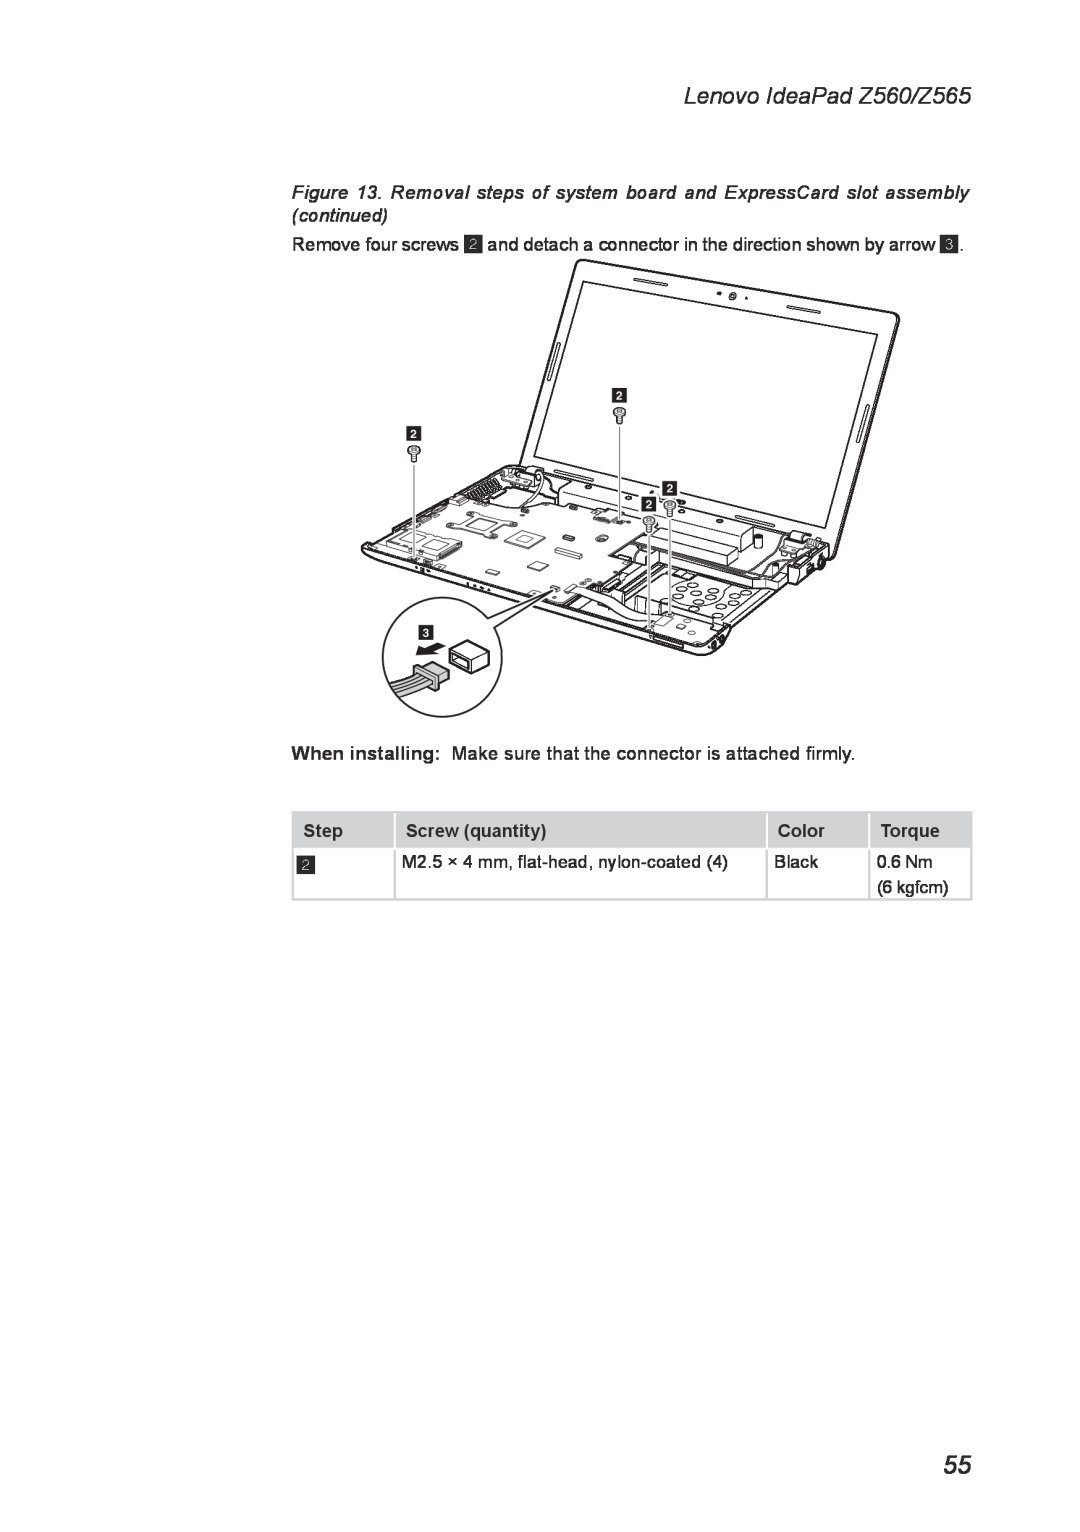 Lenovo manual Lenovo IdeaPad Z560/Z565, When installing Make sure that the connector is attached firmly 